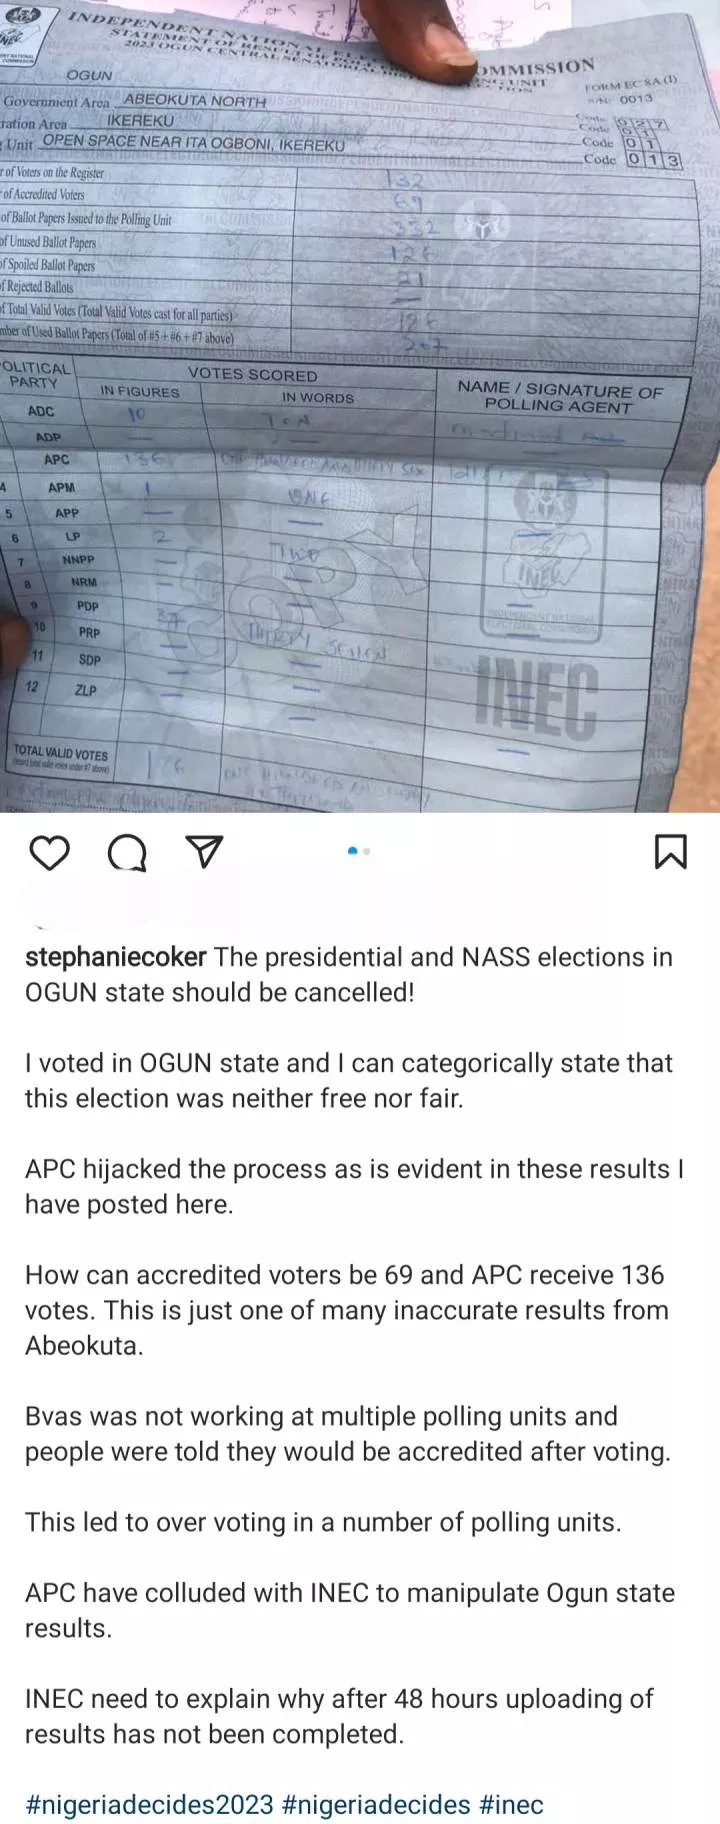 'APC have coluded with INEC to manipulate Ogun State results